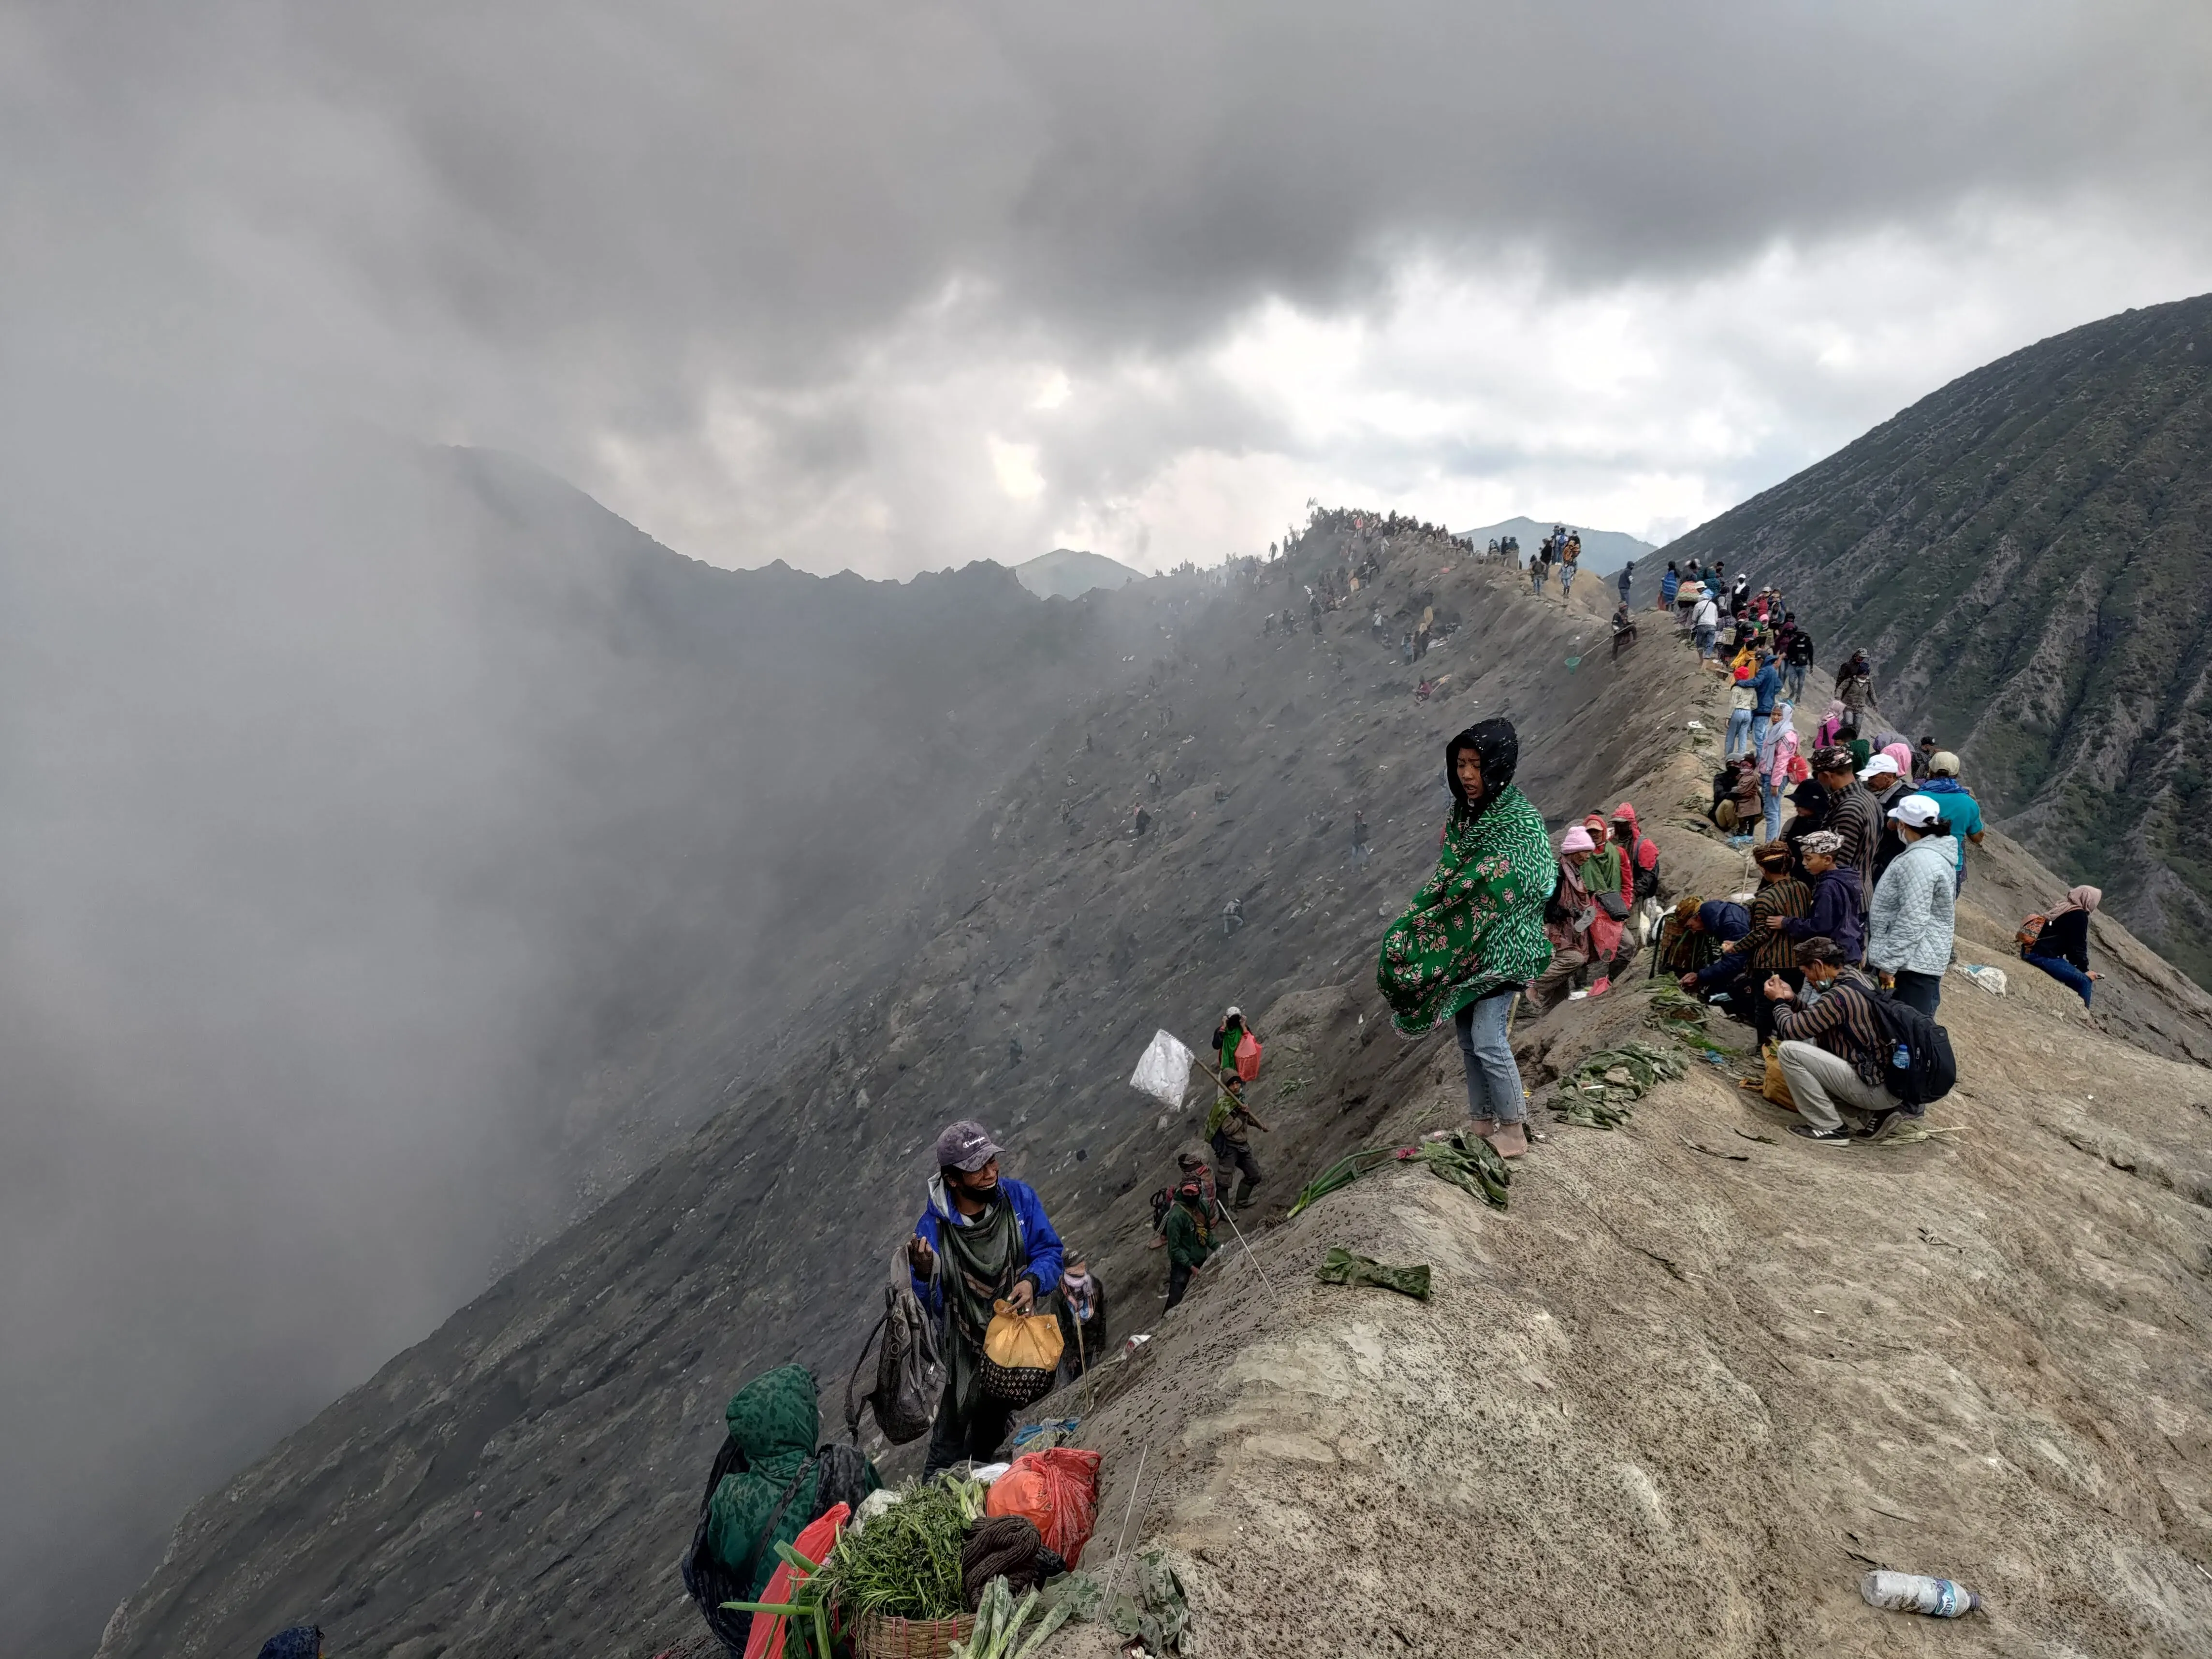 Mount bromo crater lined with people paying tributes in a festival